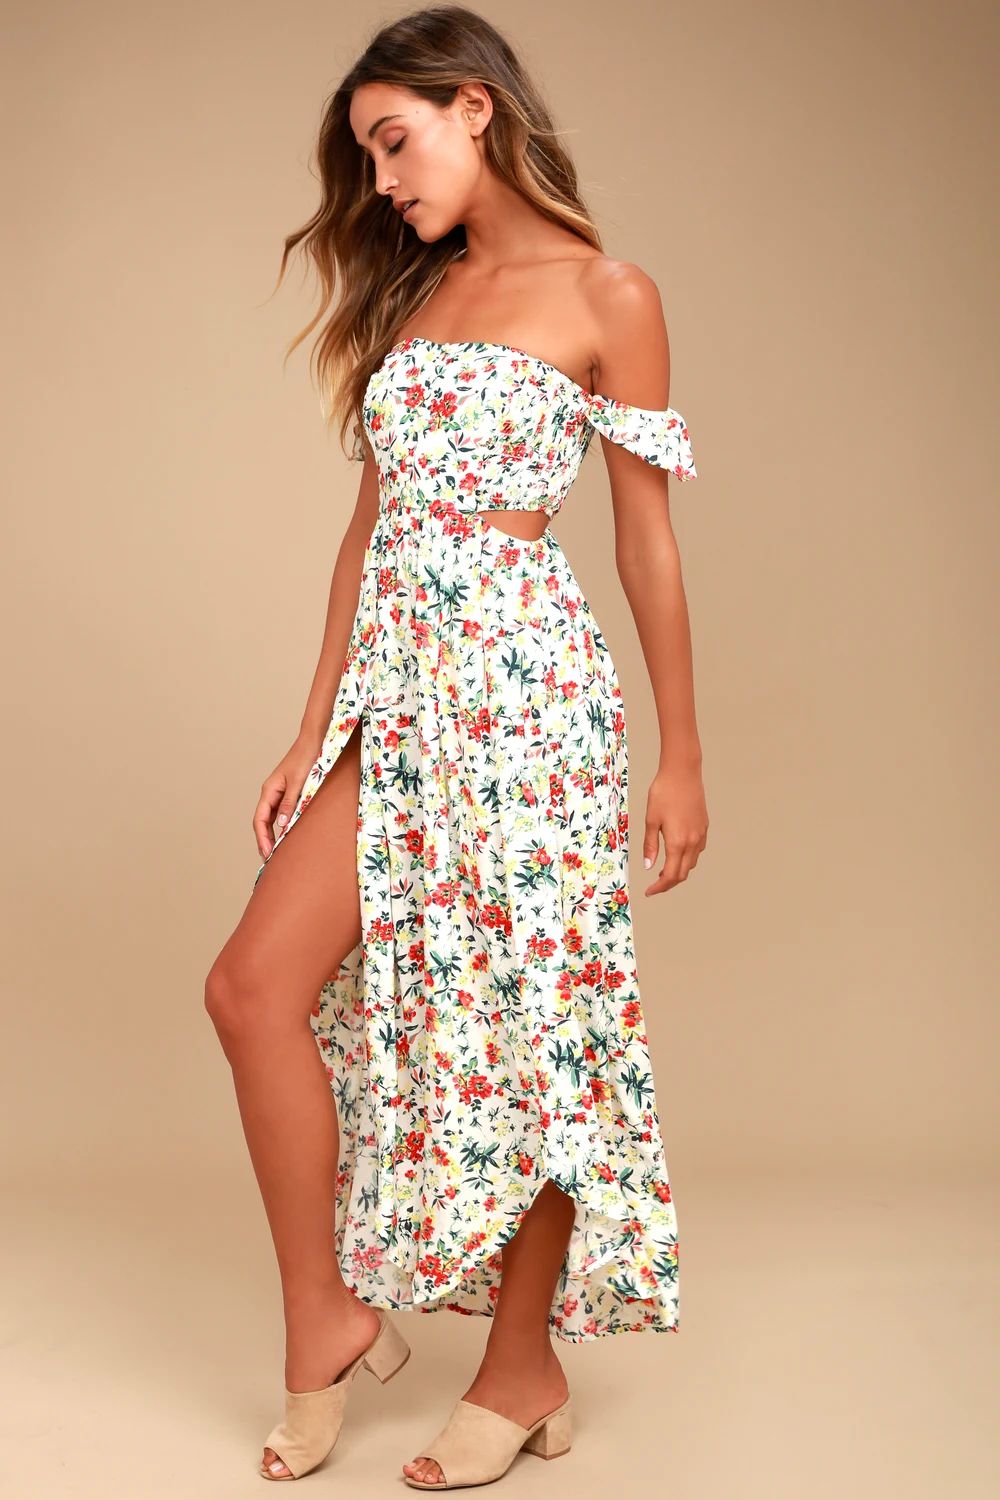 Easy on the Eyes Cream Floral Print Off-the-Shoulder Maxi Dress | Lulus